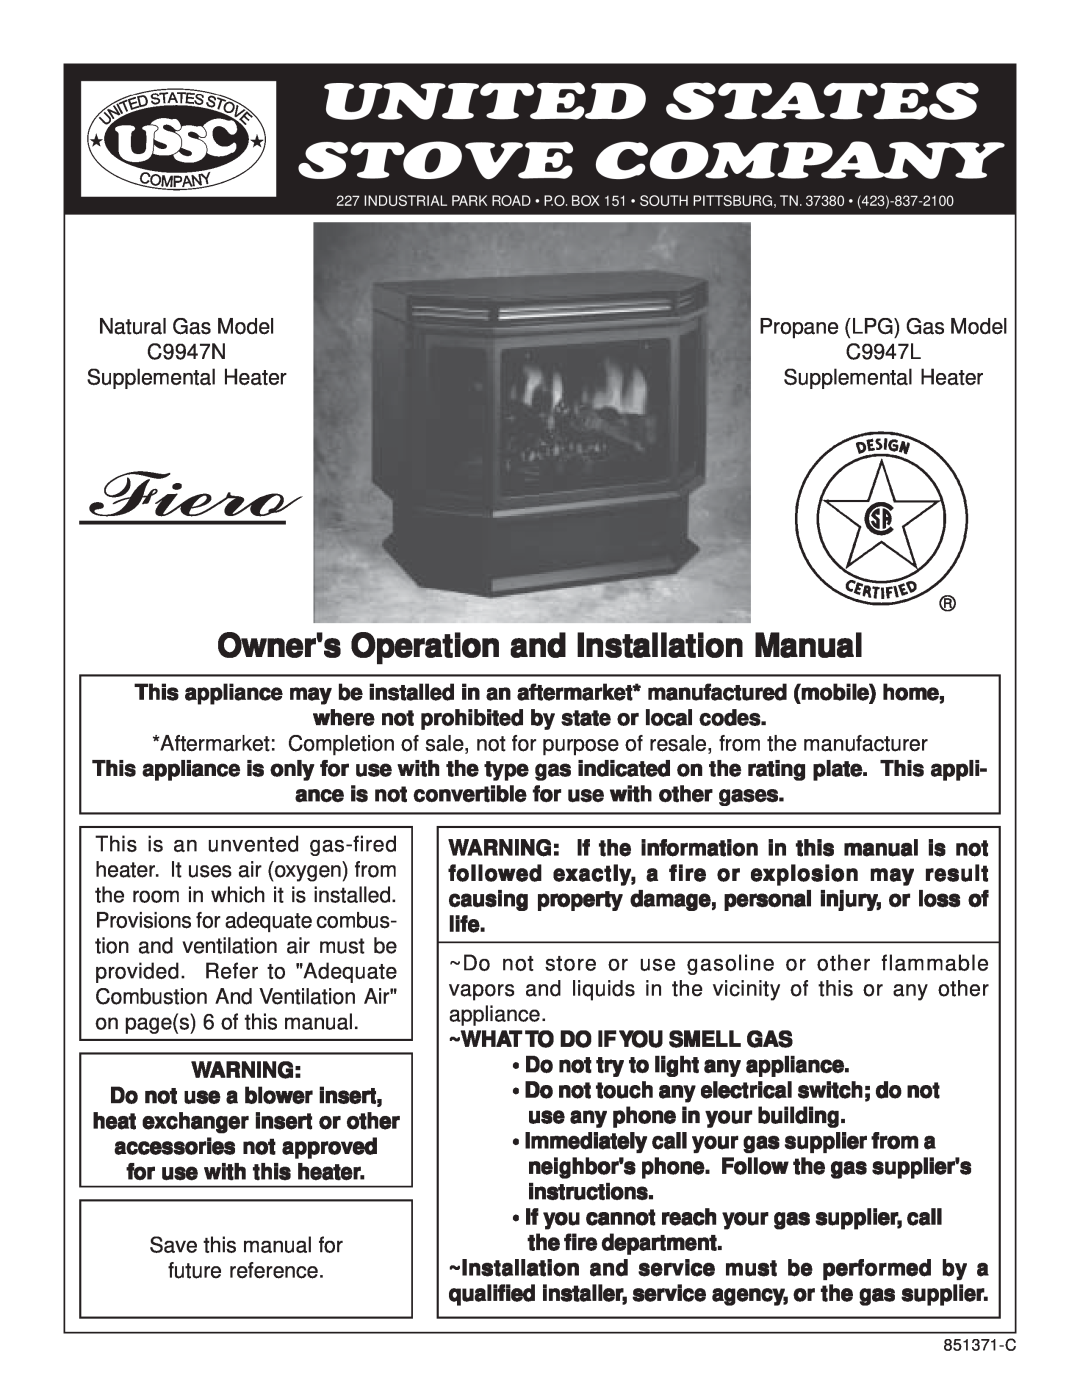 United States Stove 9947 installation manual Owners Operation and Installation Manual, Fiero, United States Stove Company 